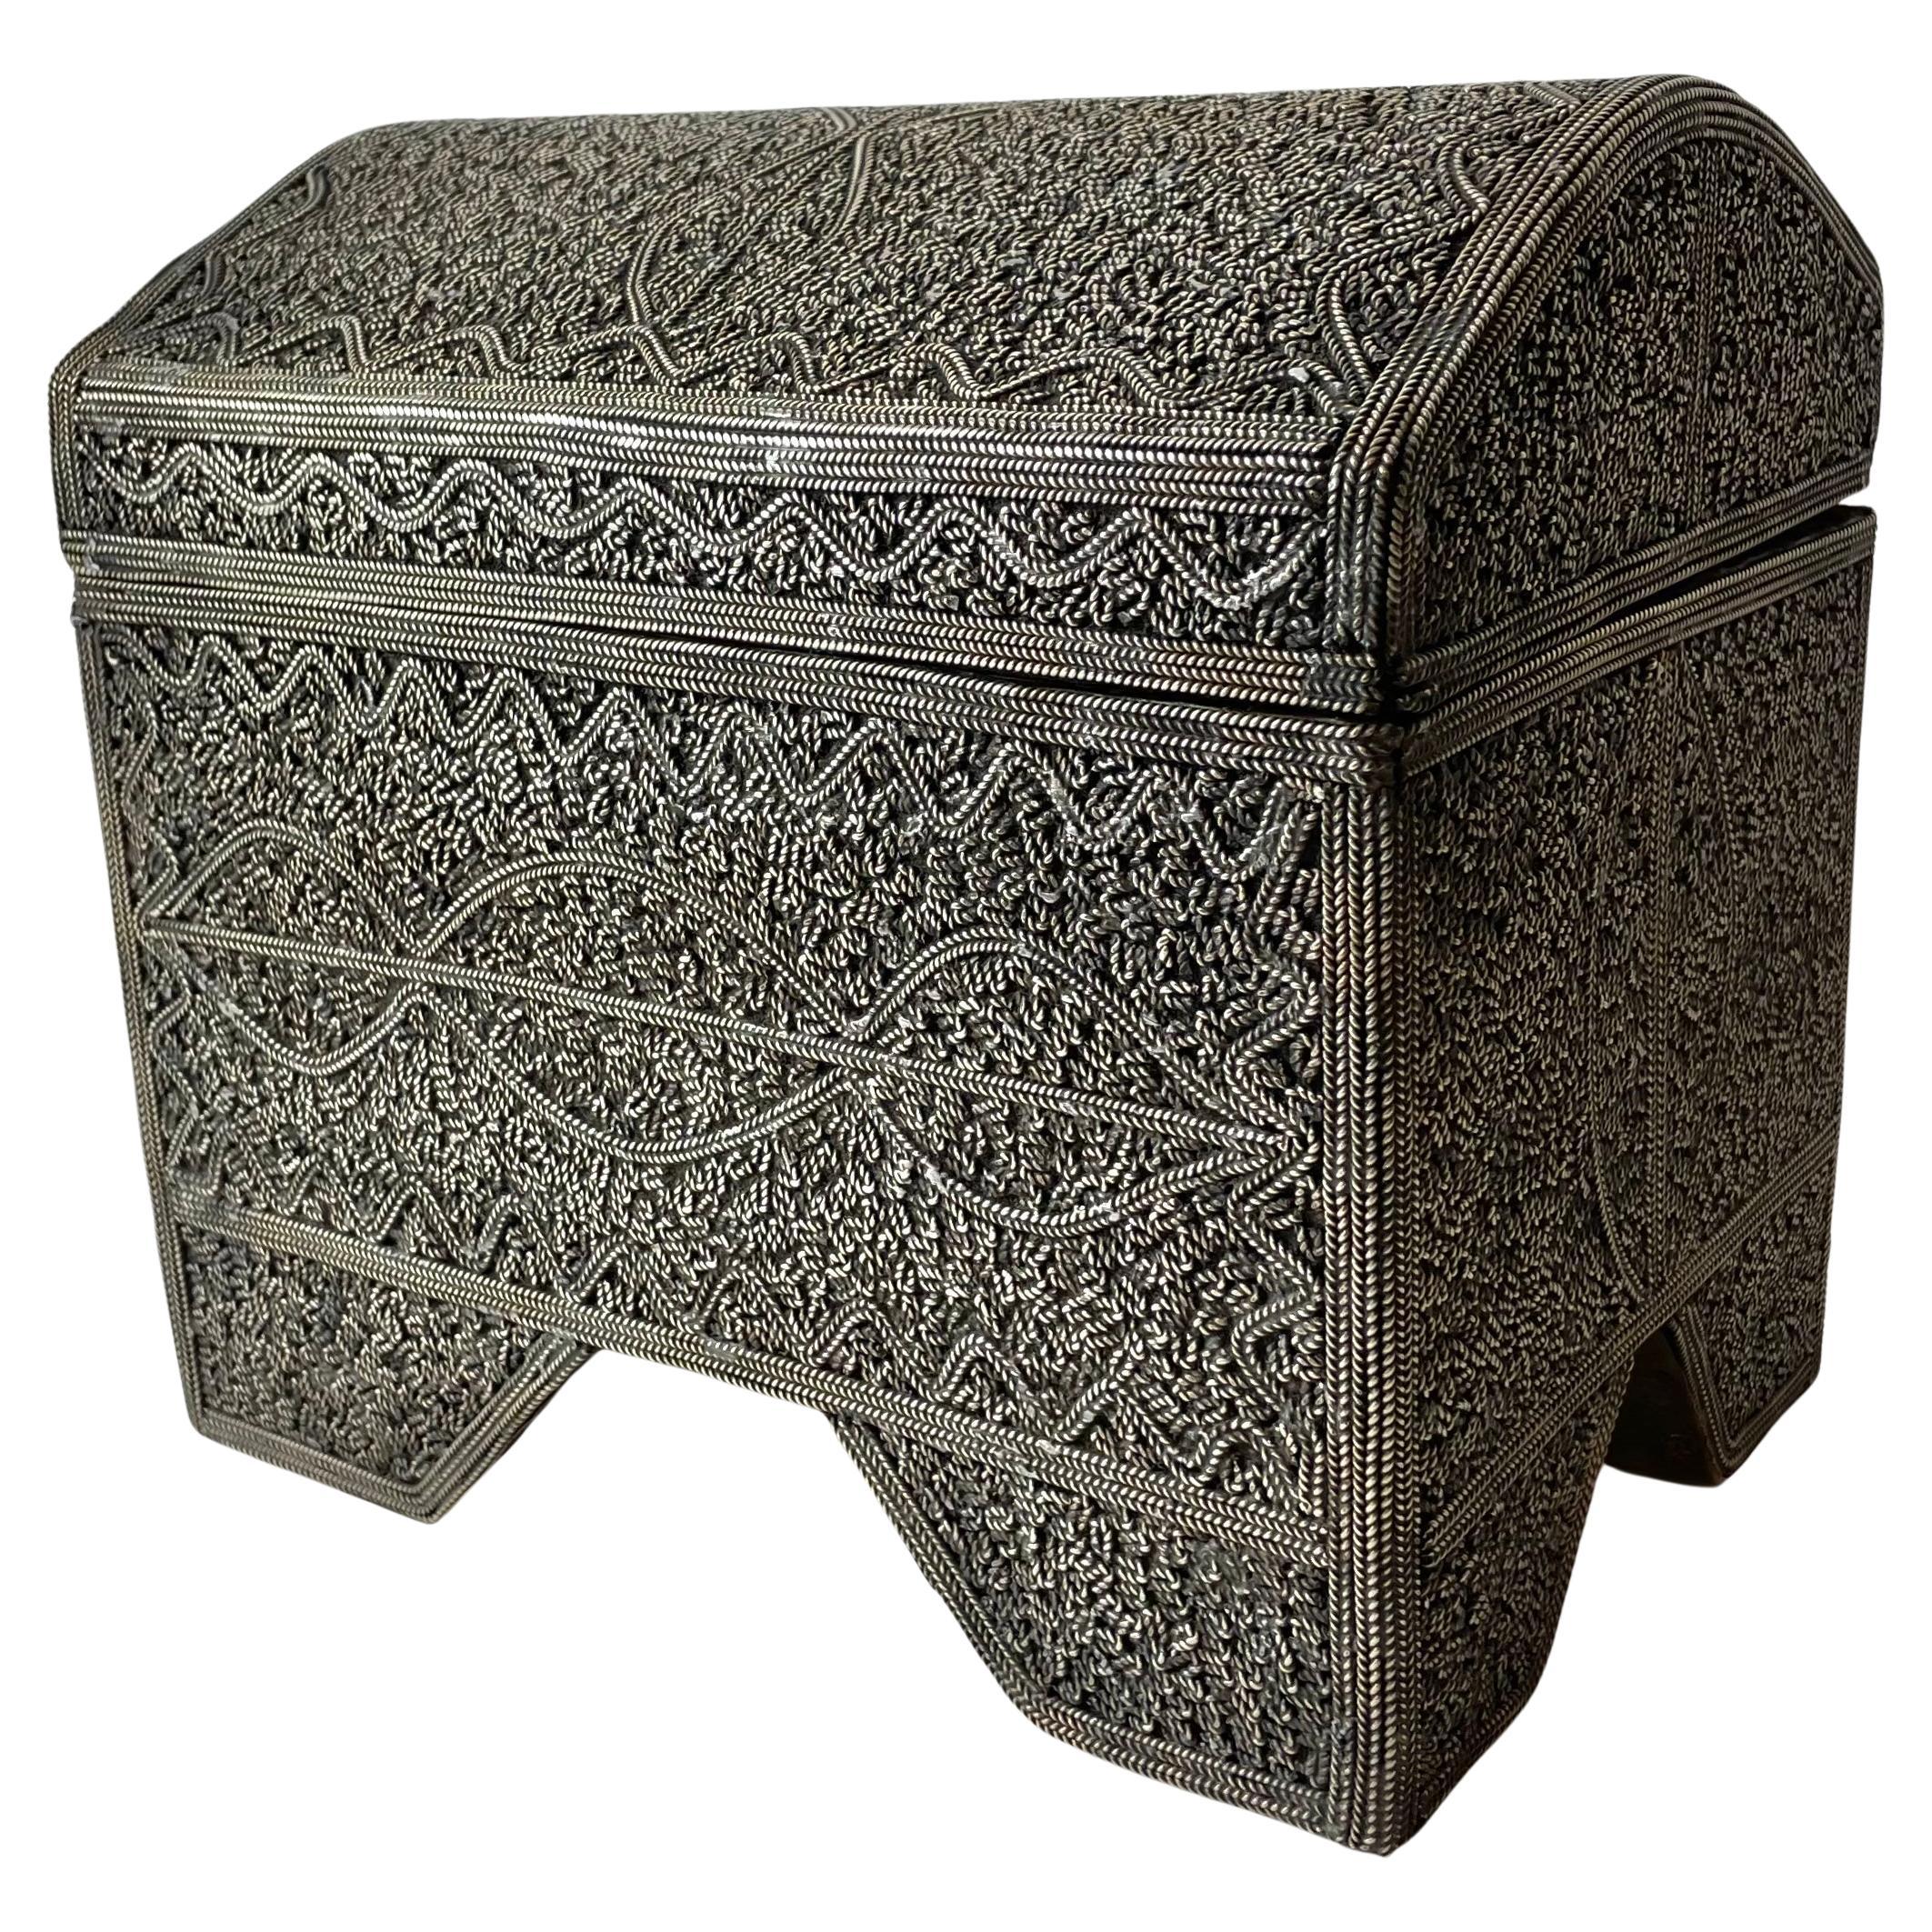 Beautiful North African Box Richly Decorated with Silver Wire, Late 19th Century For Sale